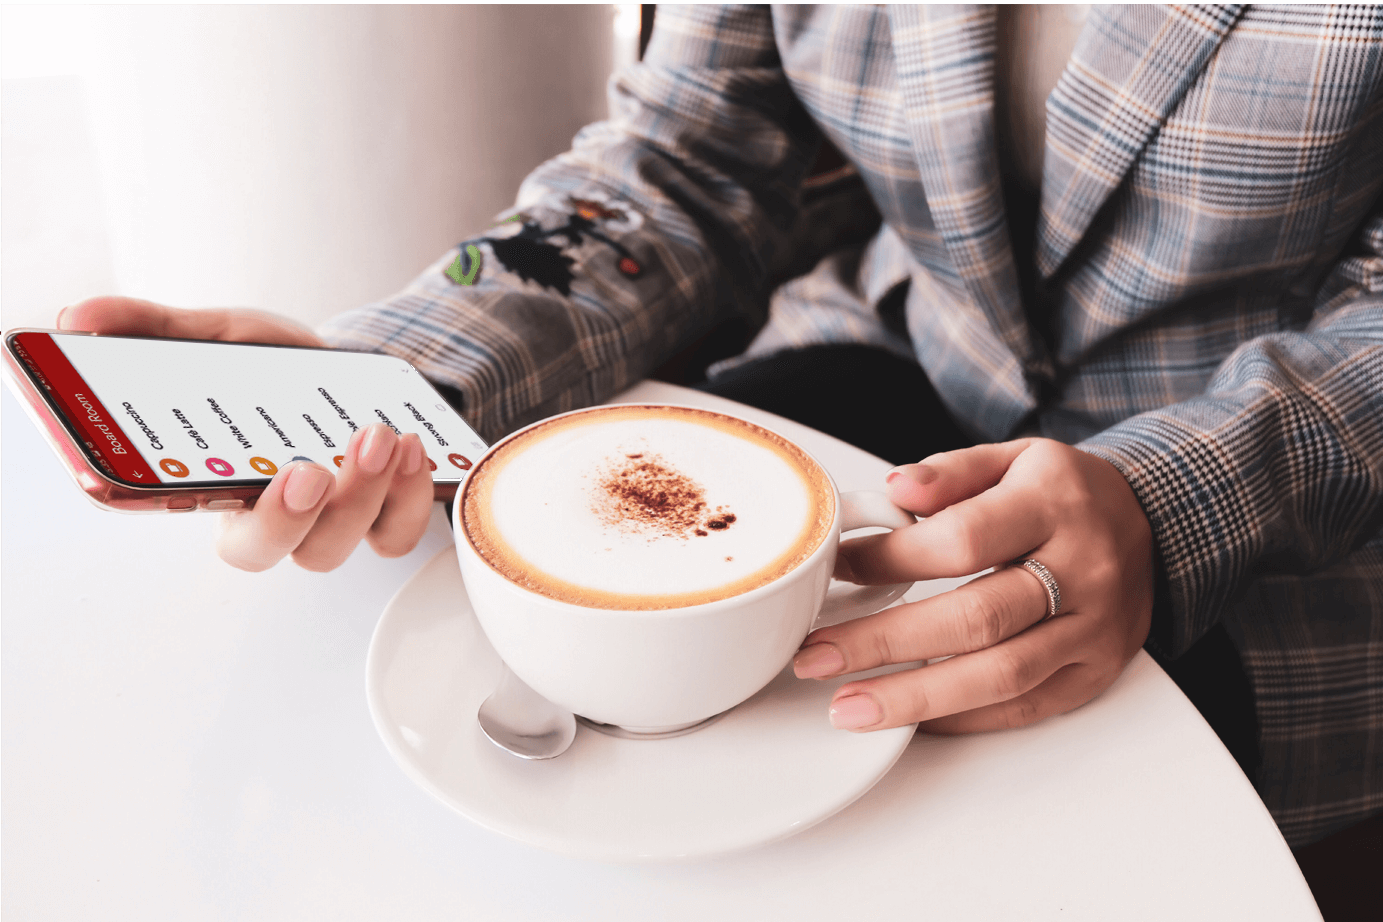 Person using touches coffee machine app on their phone